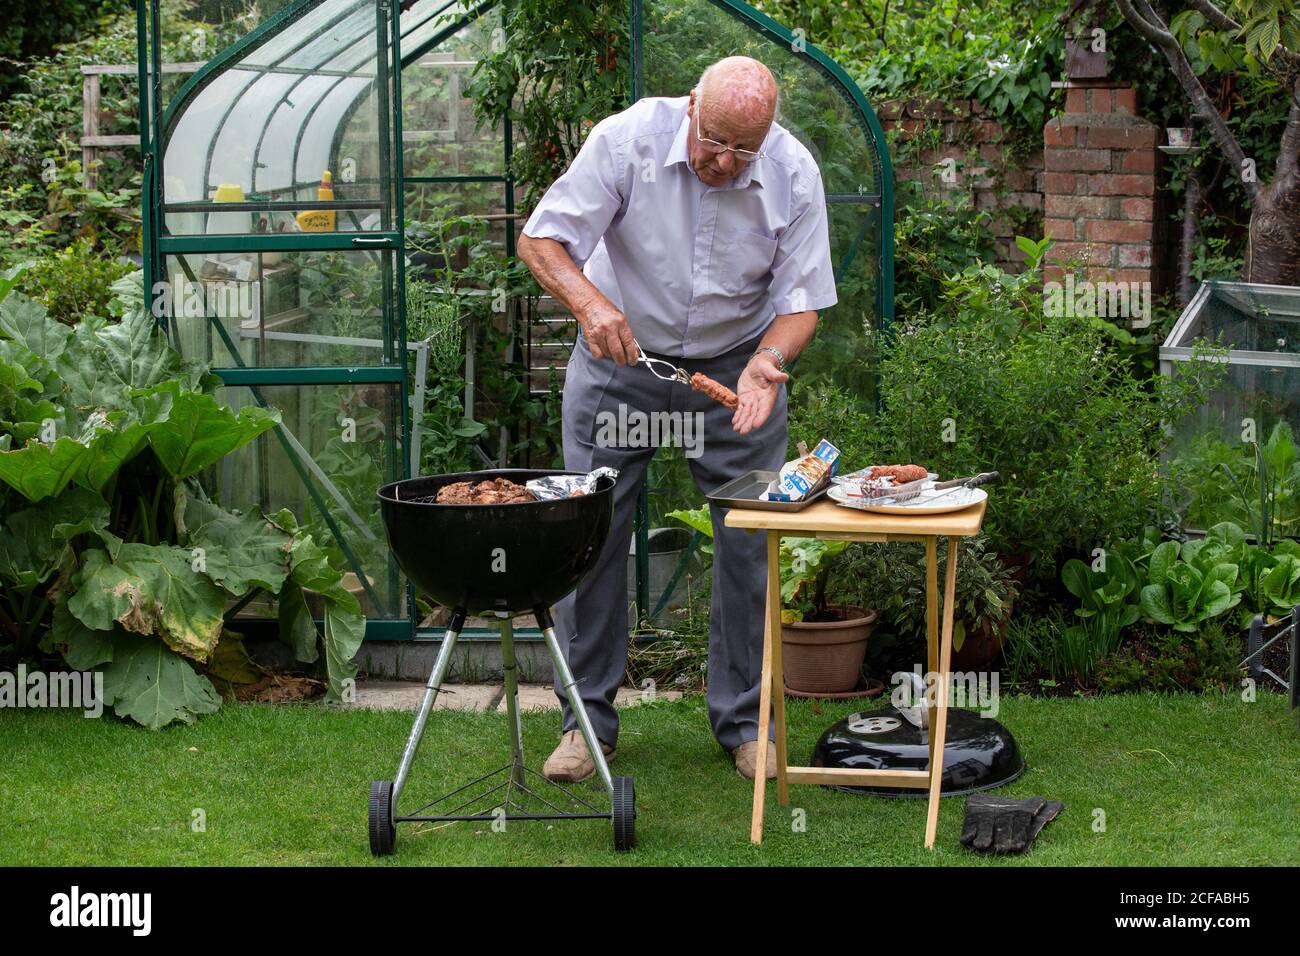 Retired pensioner in his 80's enjoying life outdoors barbecuing and eating healthy home grown vegetables during the coronavirus lockdown, Somerset UK Stock Photo